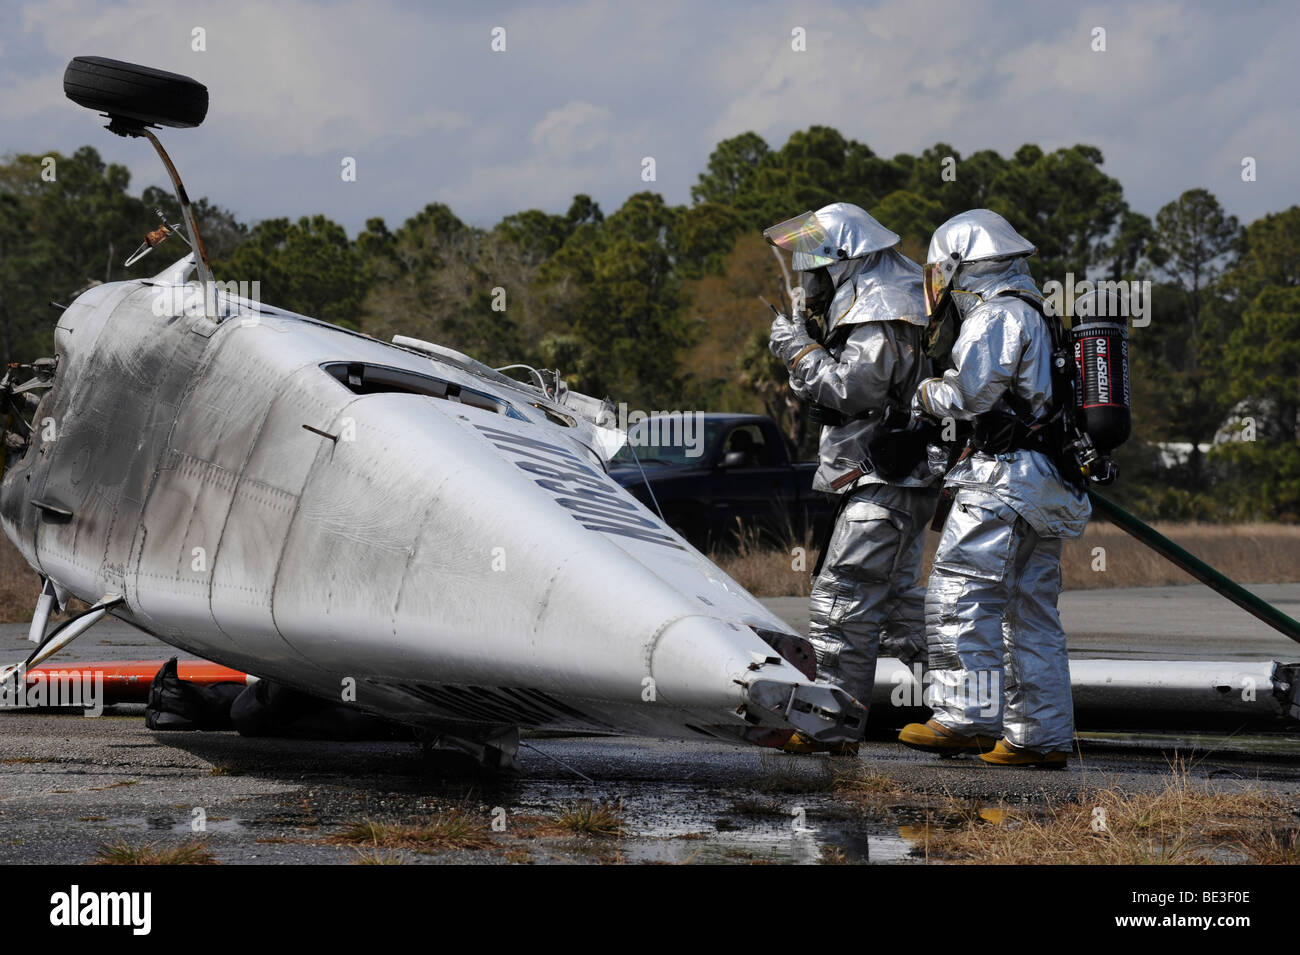 Firefighters respond to the scene of a simulated plane crash. Stock Photo